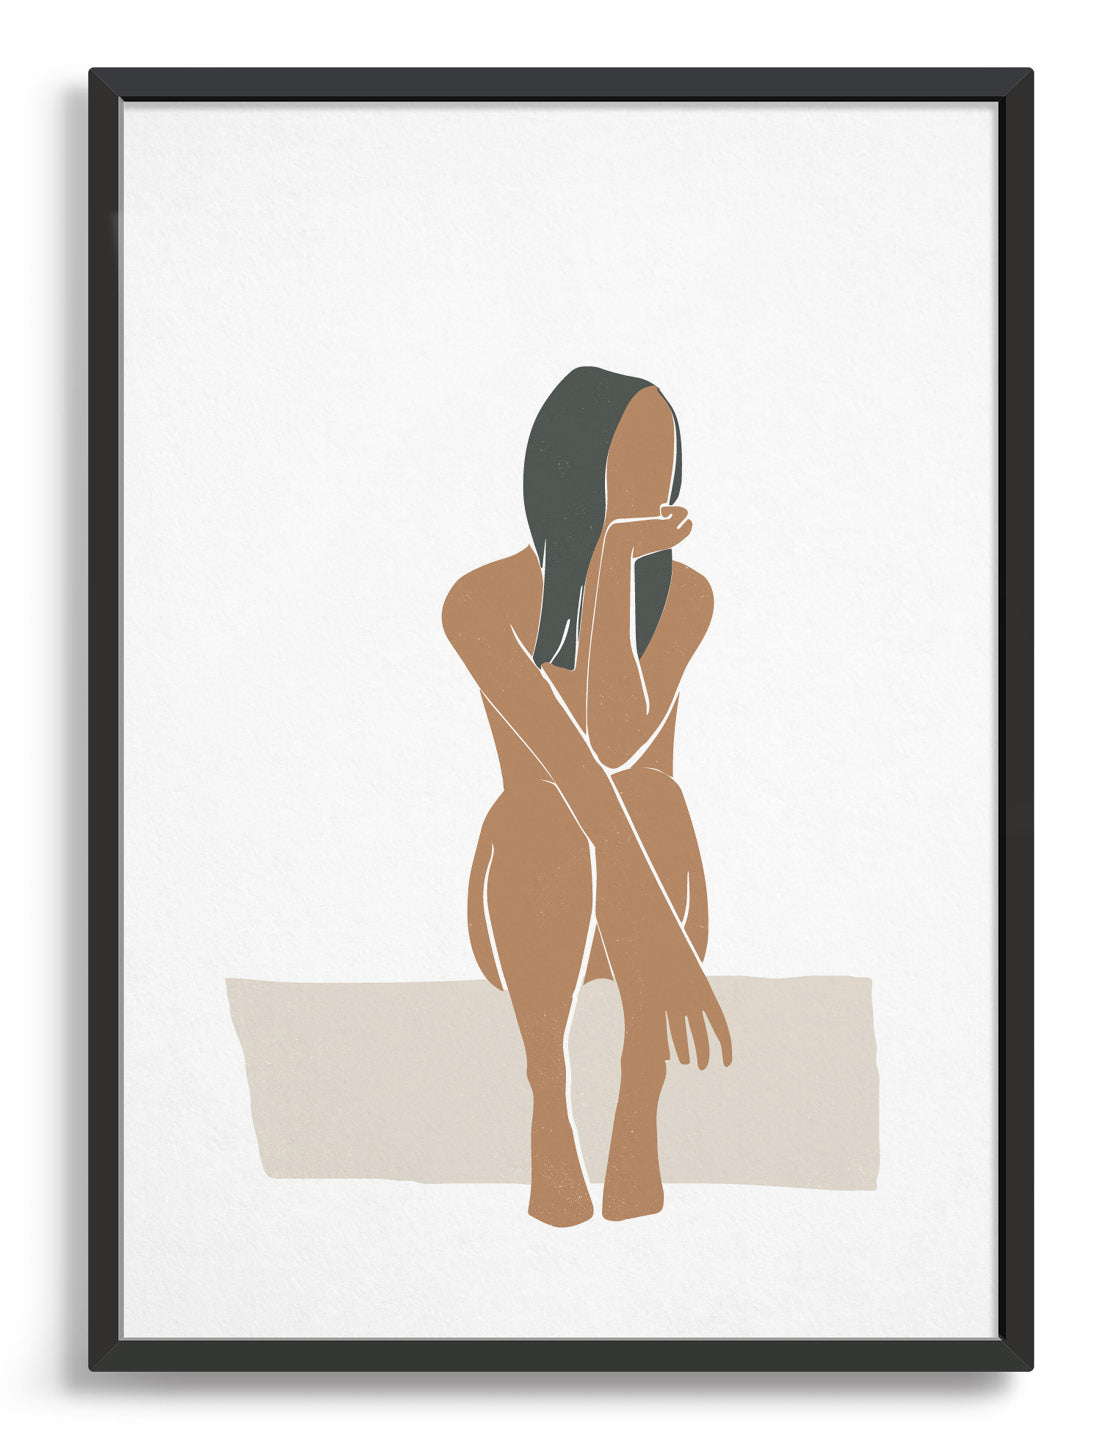 Minimal poster print depicting a nude woman with long dark hair sitting with legs up and arms on her knees looking off to one side